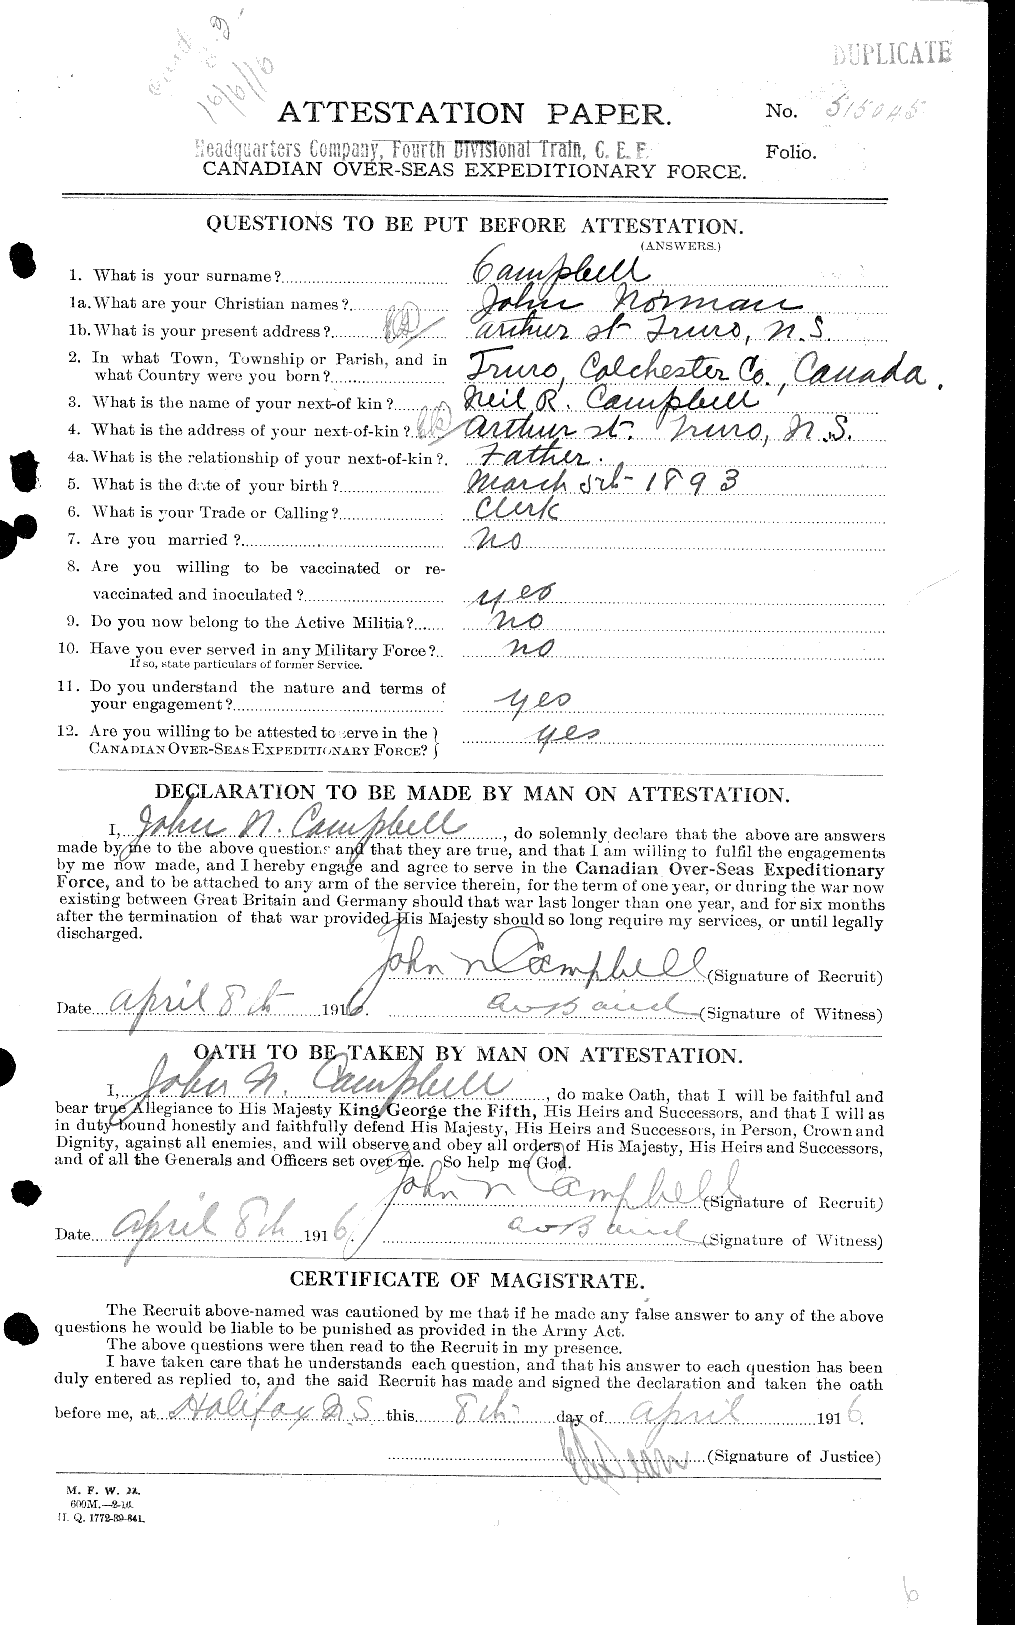 Personnel Records of the First World War - CEF 003771a